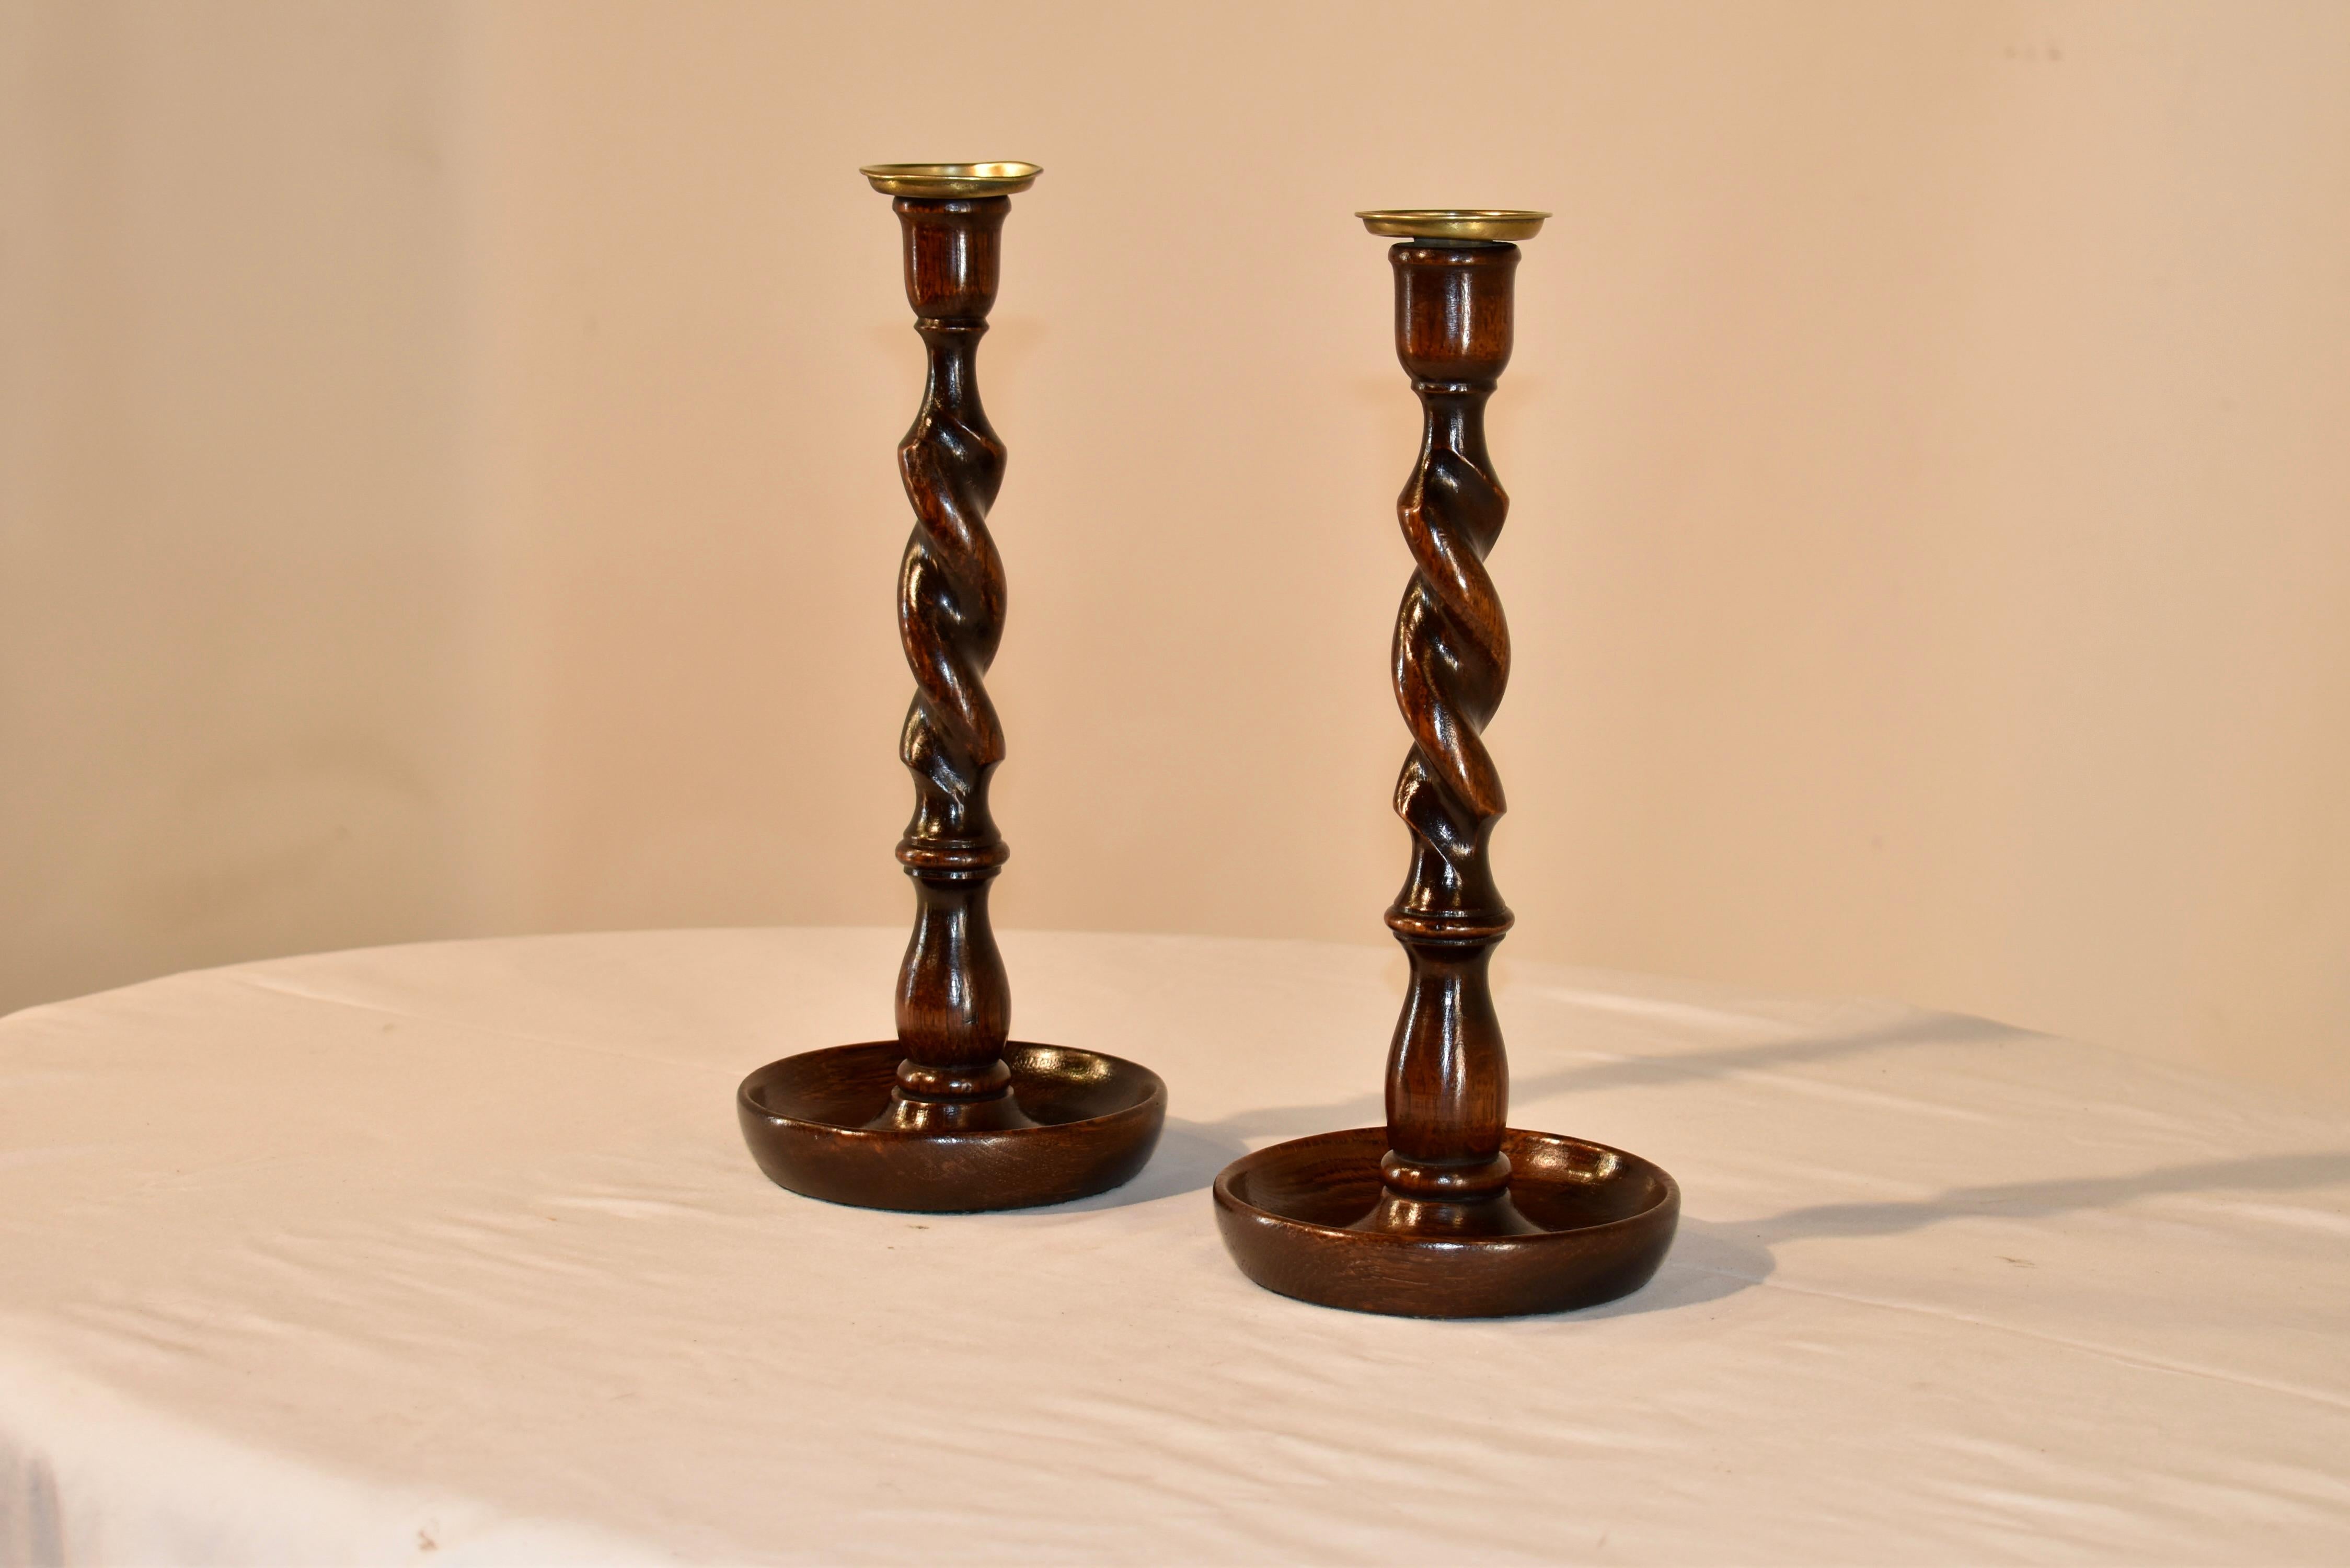 Pair of late 19th century oak candlesticks from England with a turned candle cup with brass inserts and a barley twist stem supported on a hand turned dish shaped base.